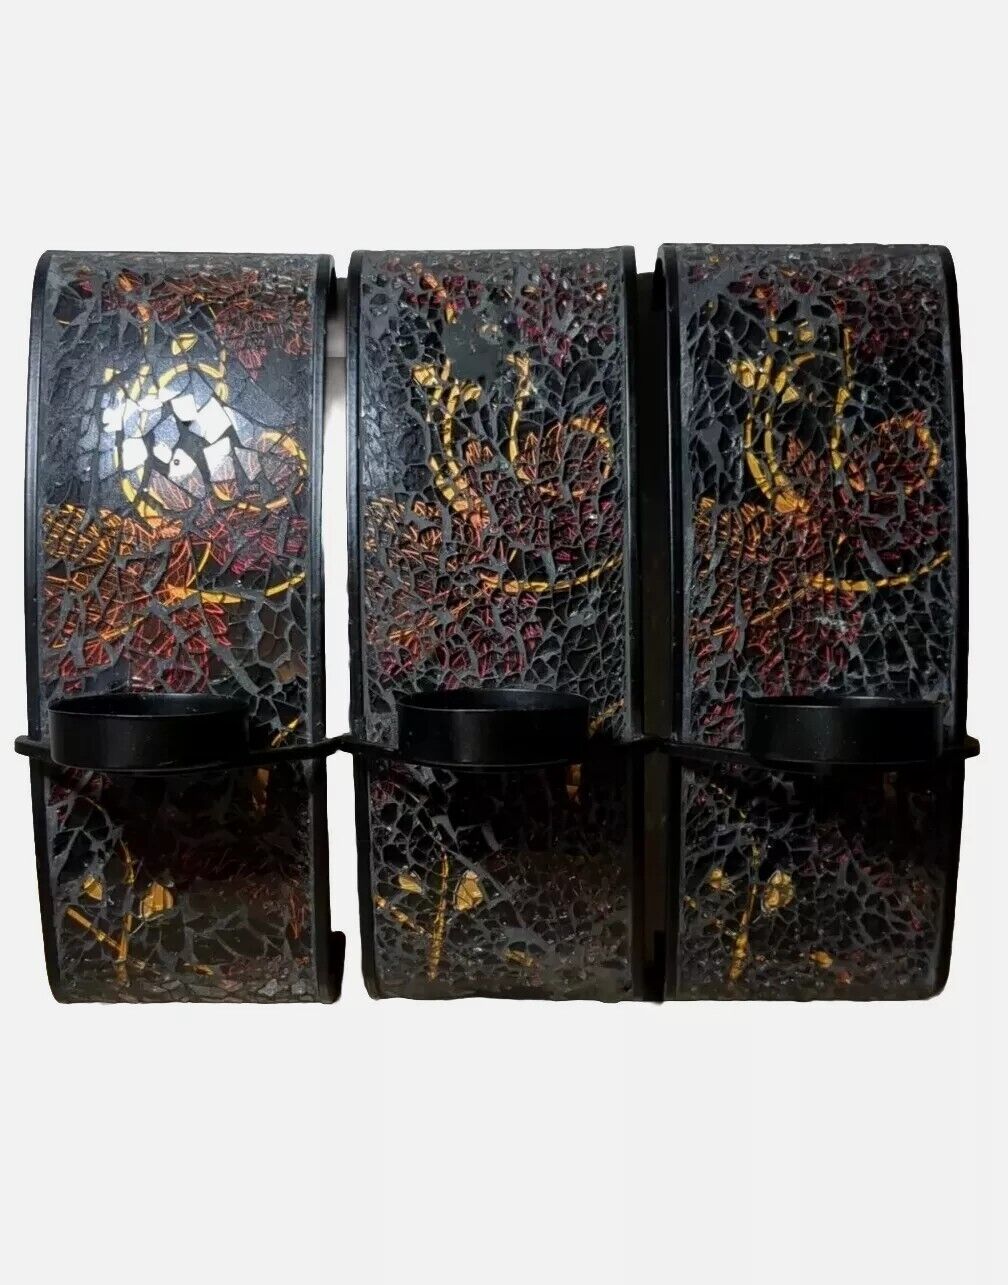 Set of 3 Art Wall Candle Holders Cracked Glass Mosaic Metal Swooped Decoration 